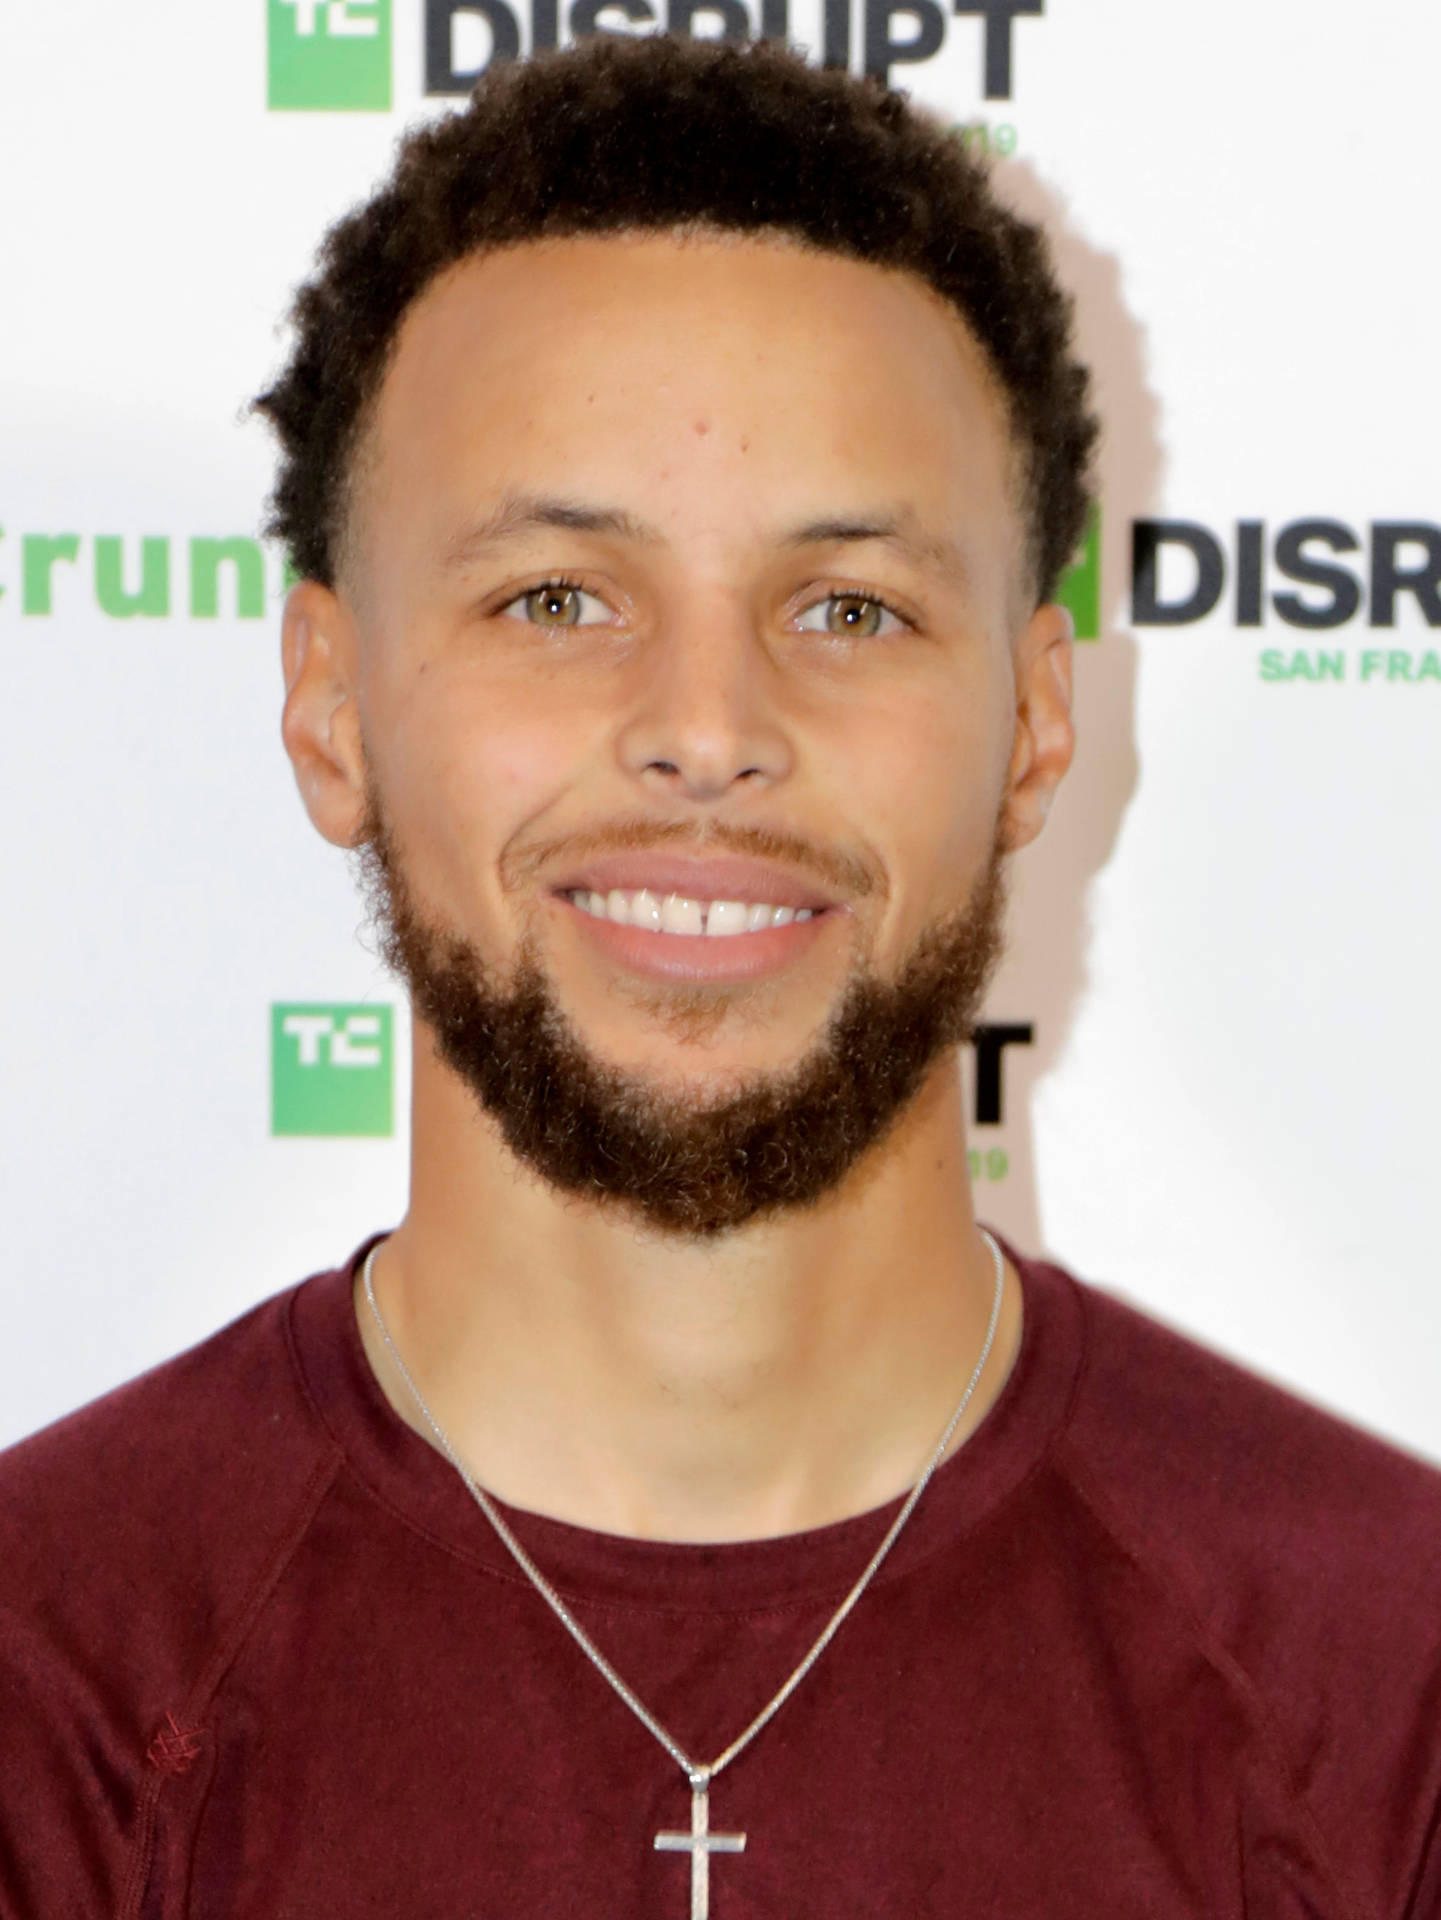 Steph Curry At Techcrunch's Disrupt Sf Conference